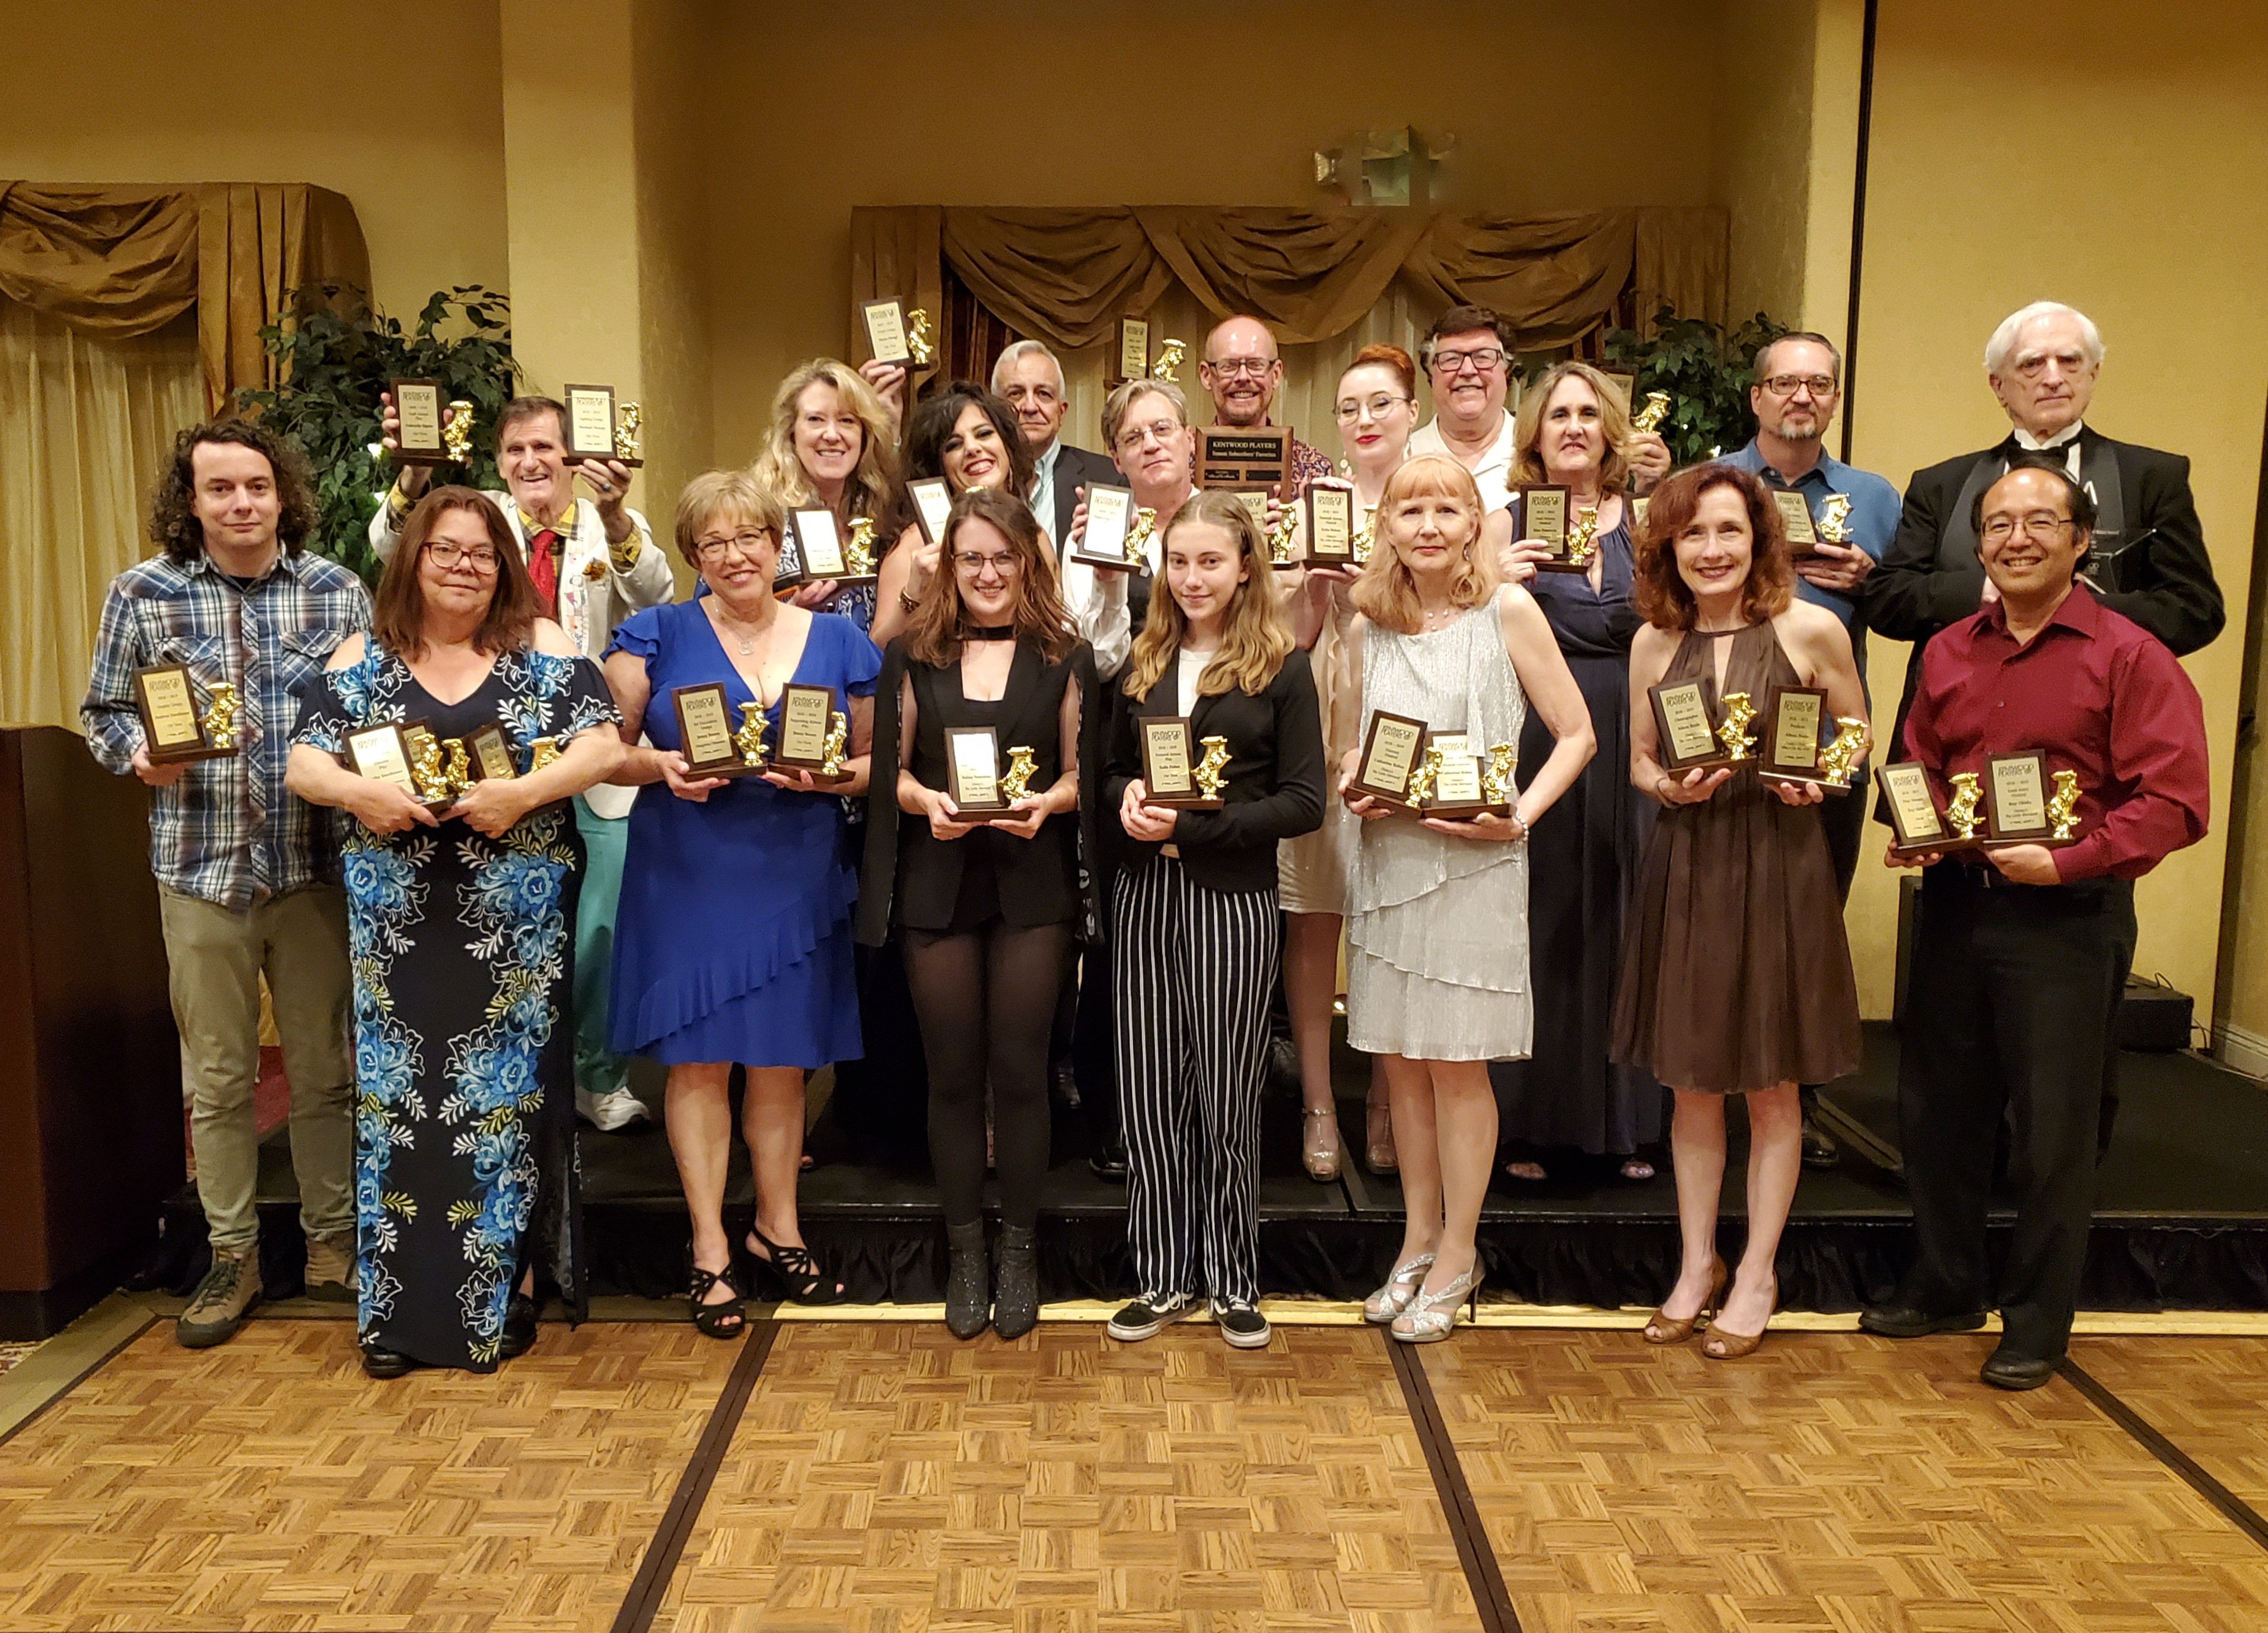 2018-2019 Marcom Masque Award winners pose for a group photo